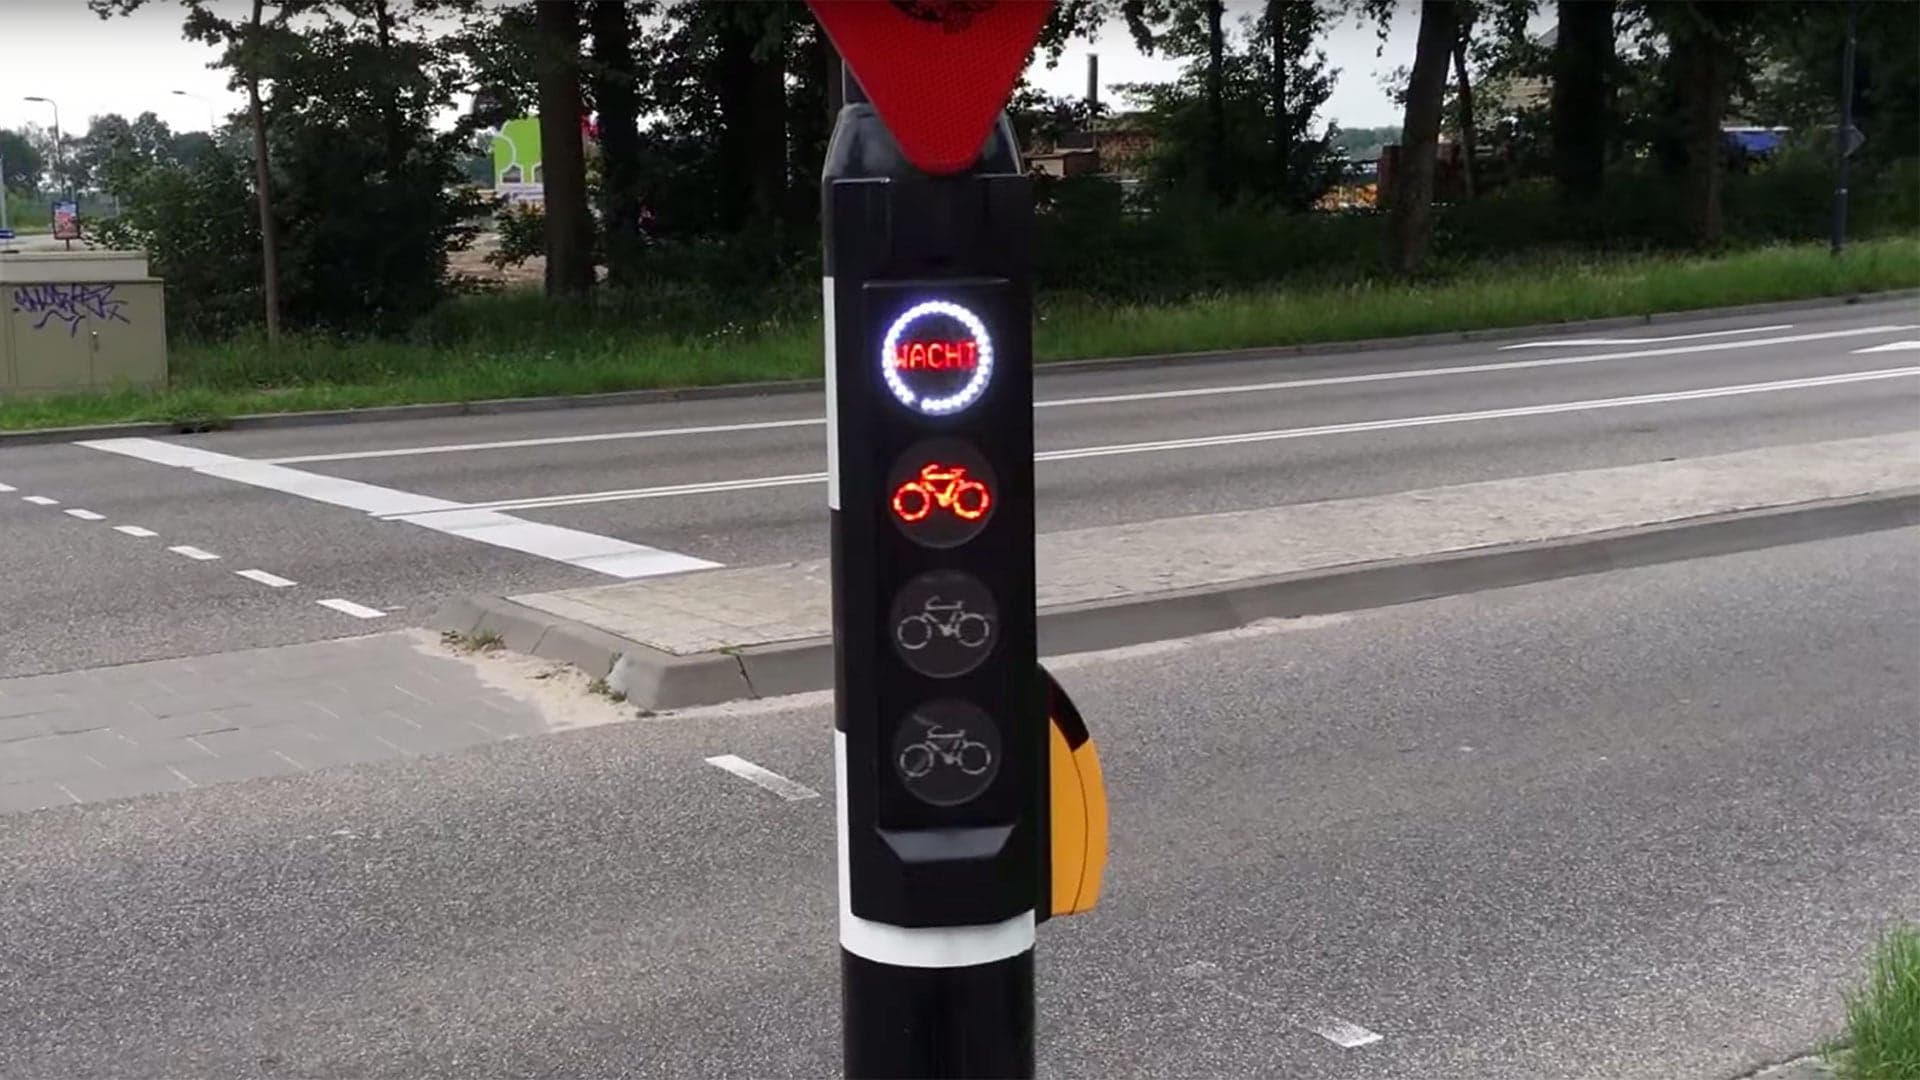 This Dutch City Has the World’s Smartest Traffic Lights